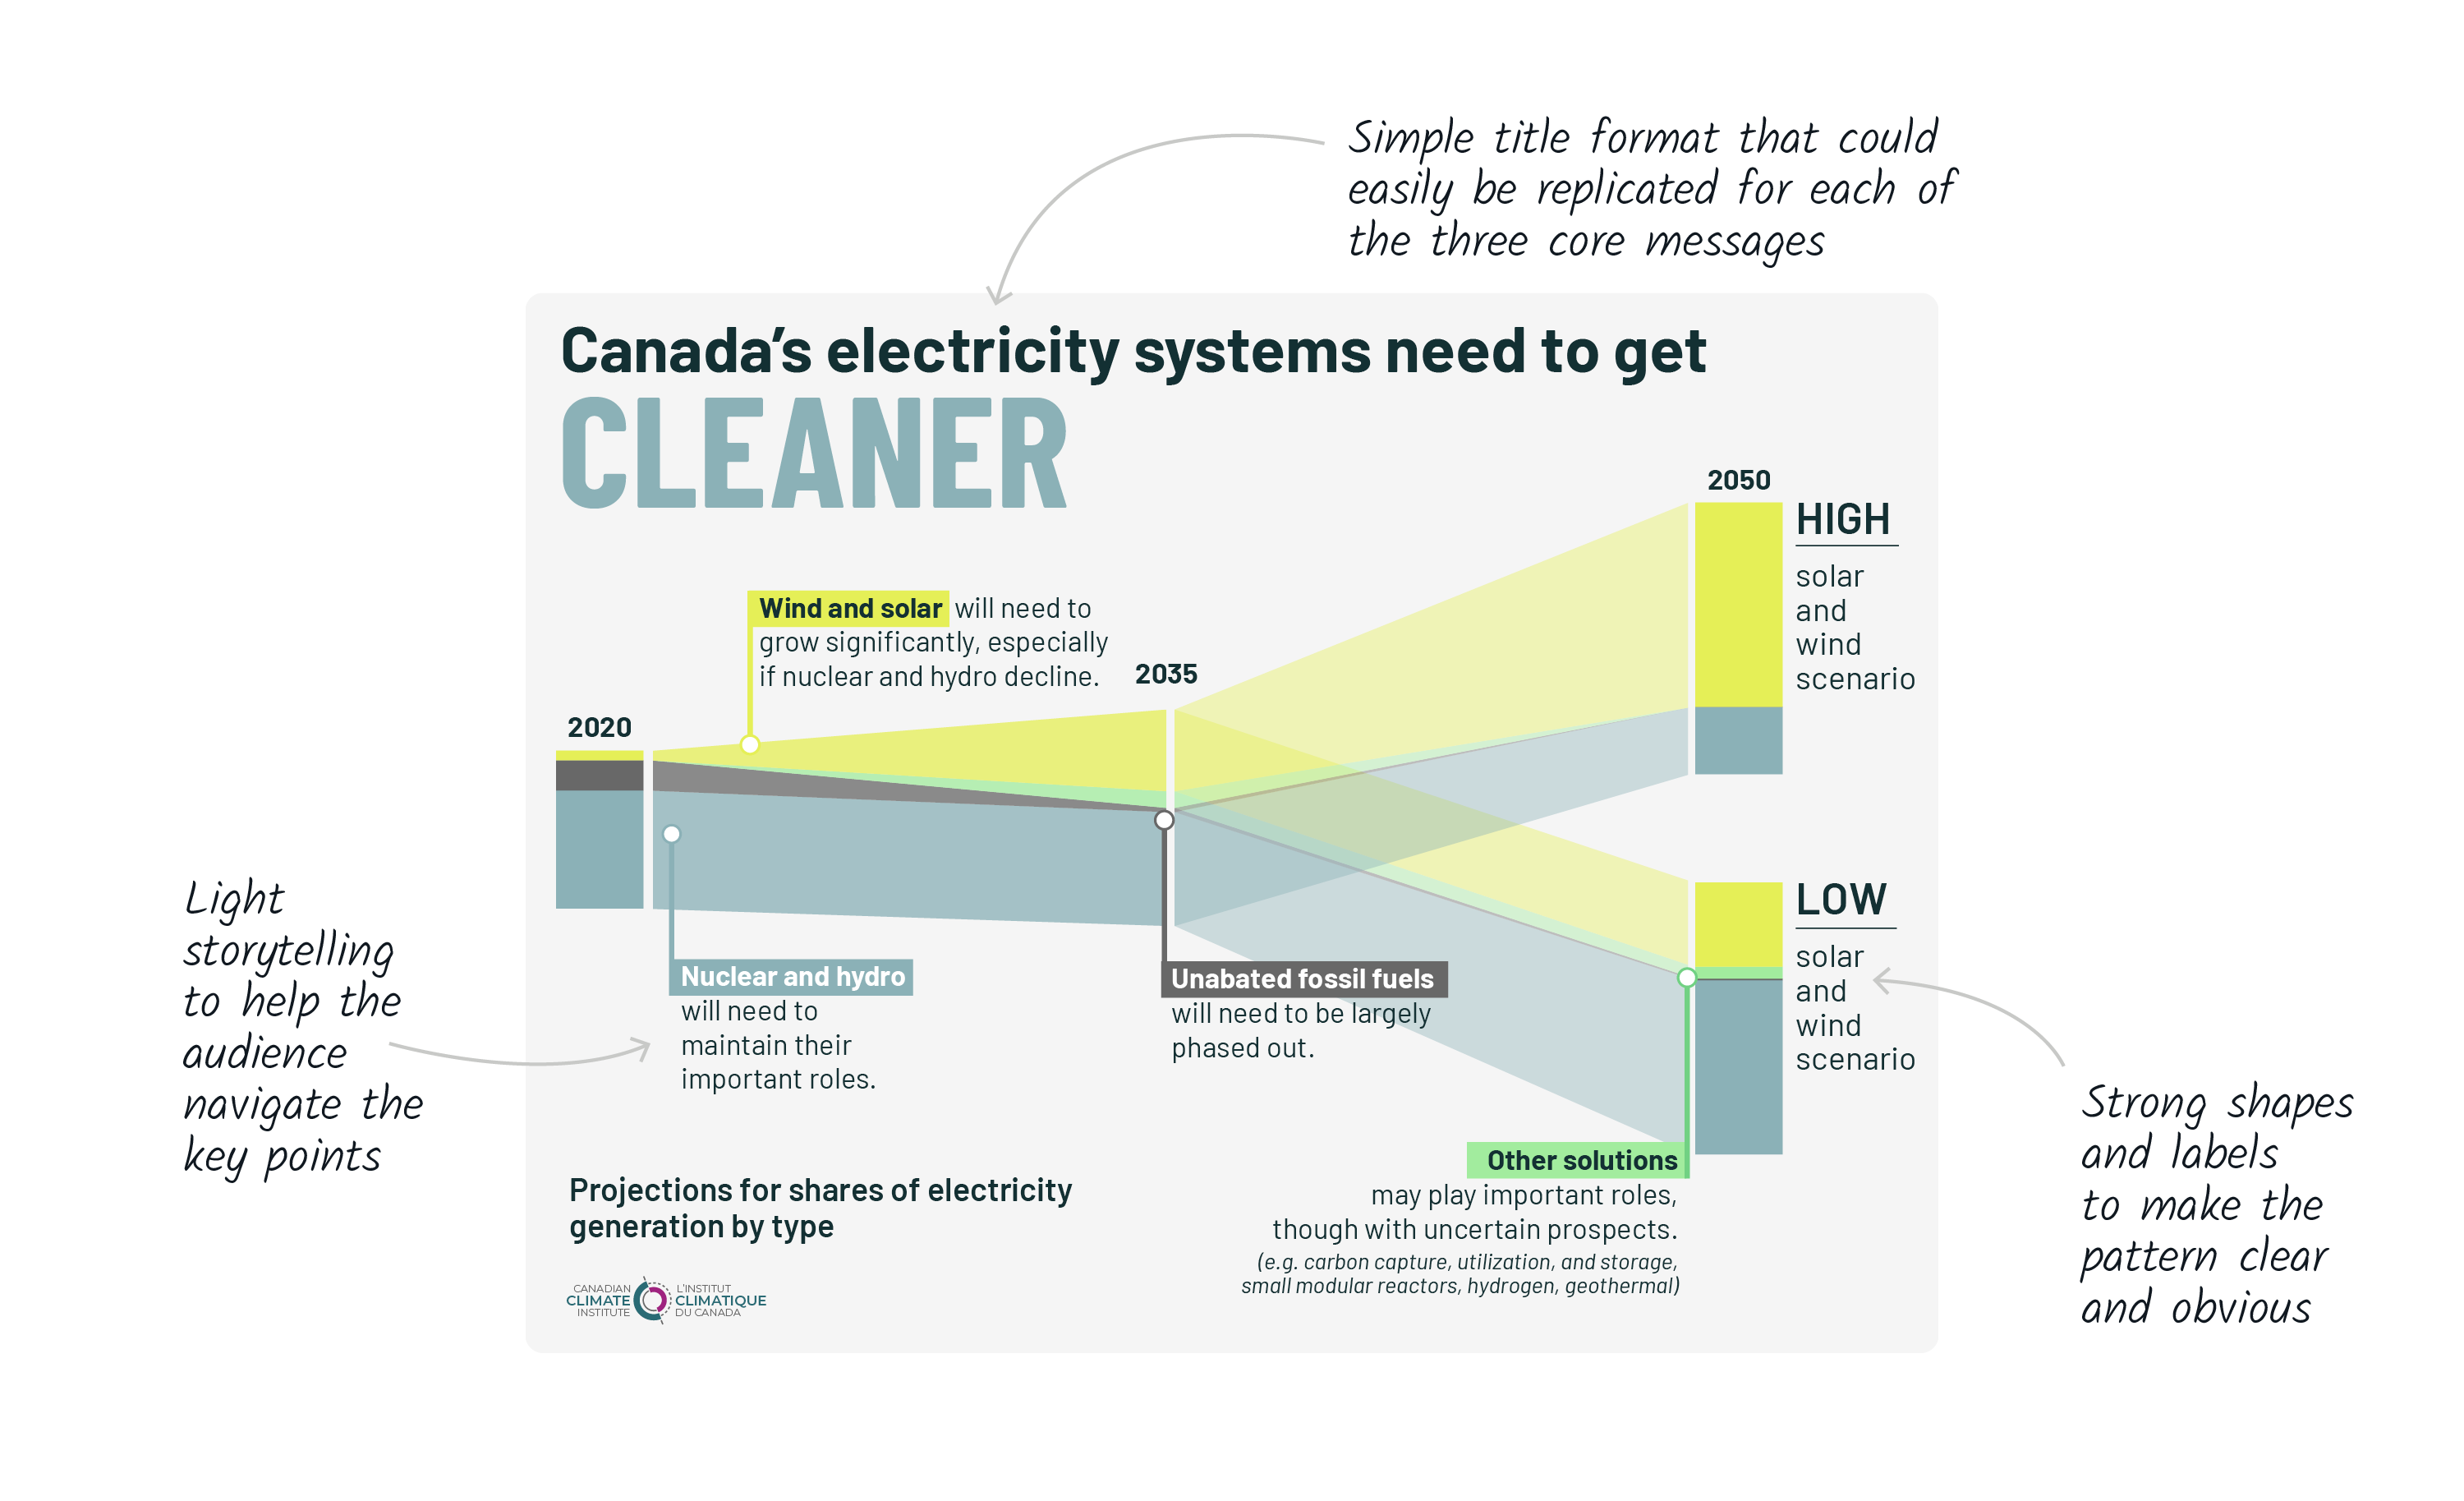 The infographic “Canada's electricity systems need to get cleaner” illustrates the projections of electricity generation by type (wind and solar, nuclear and hydro, fossil fuels and other alternatives) between 2020 and 2050, under a high and a low “solar and wind” scenario. This last figure changes the projection of production after 2035, where the graph splits into two different projection branches for the year 2050. The infographic then takes on the general shape of a funnel that diverges towards the year 2050.